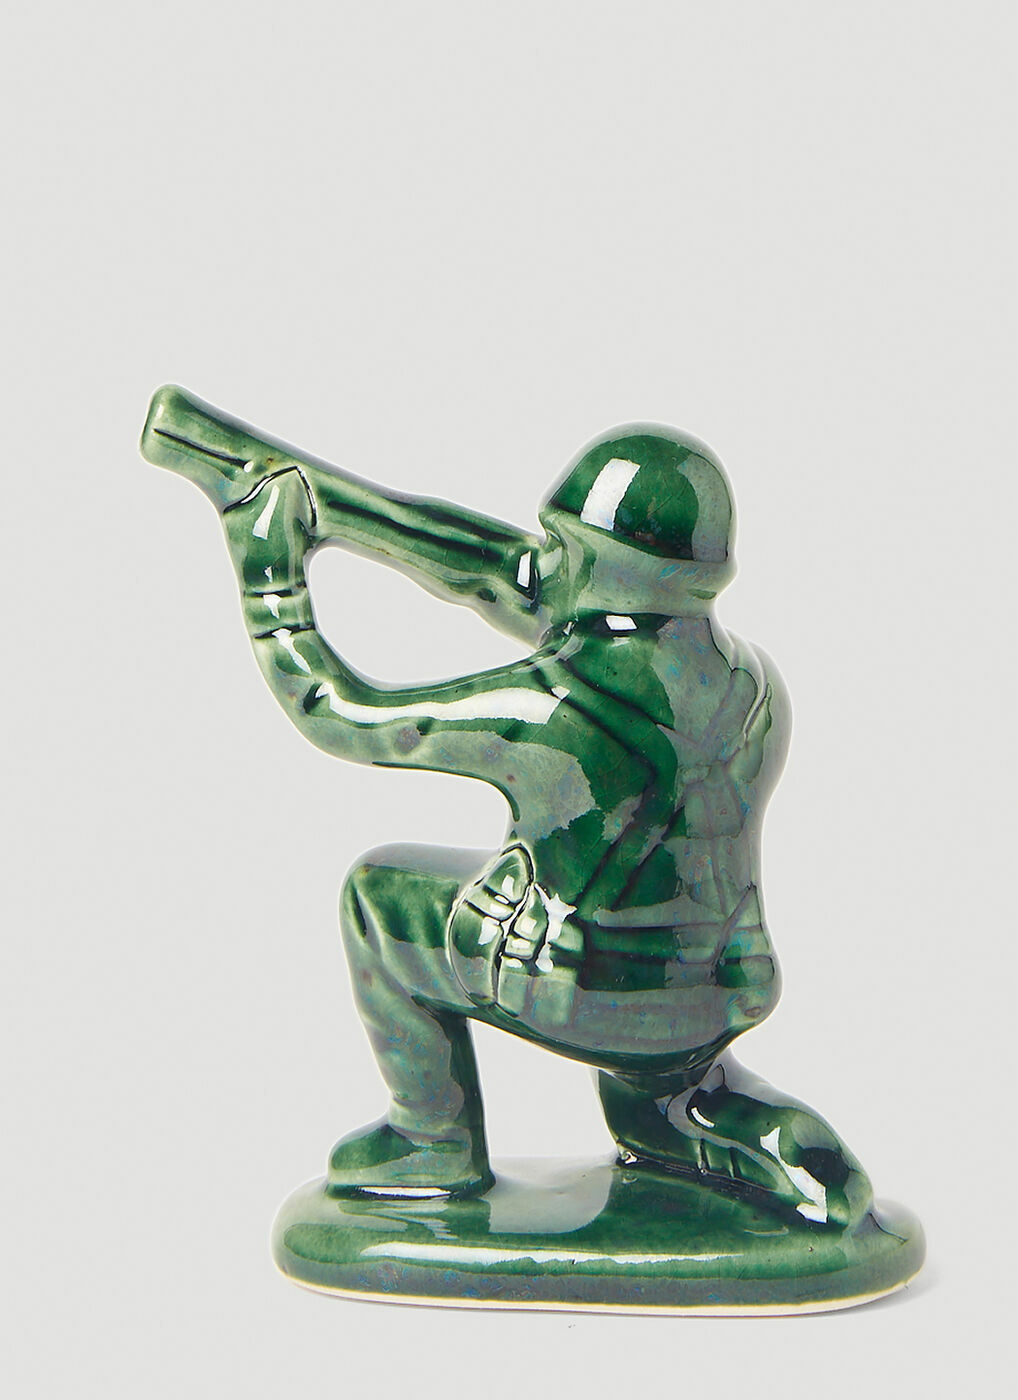 Gimme 5 - Soldier Incense Holder and Kuumba Incense Set in Green